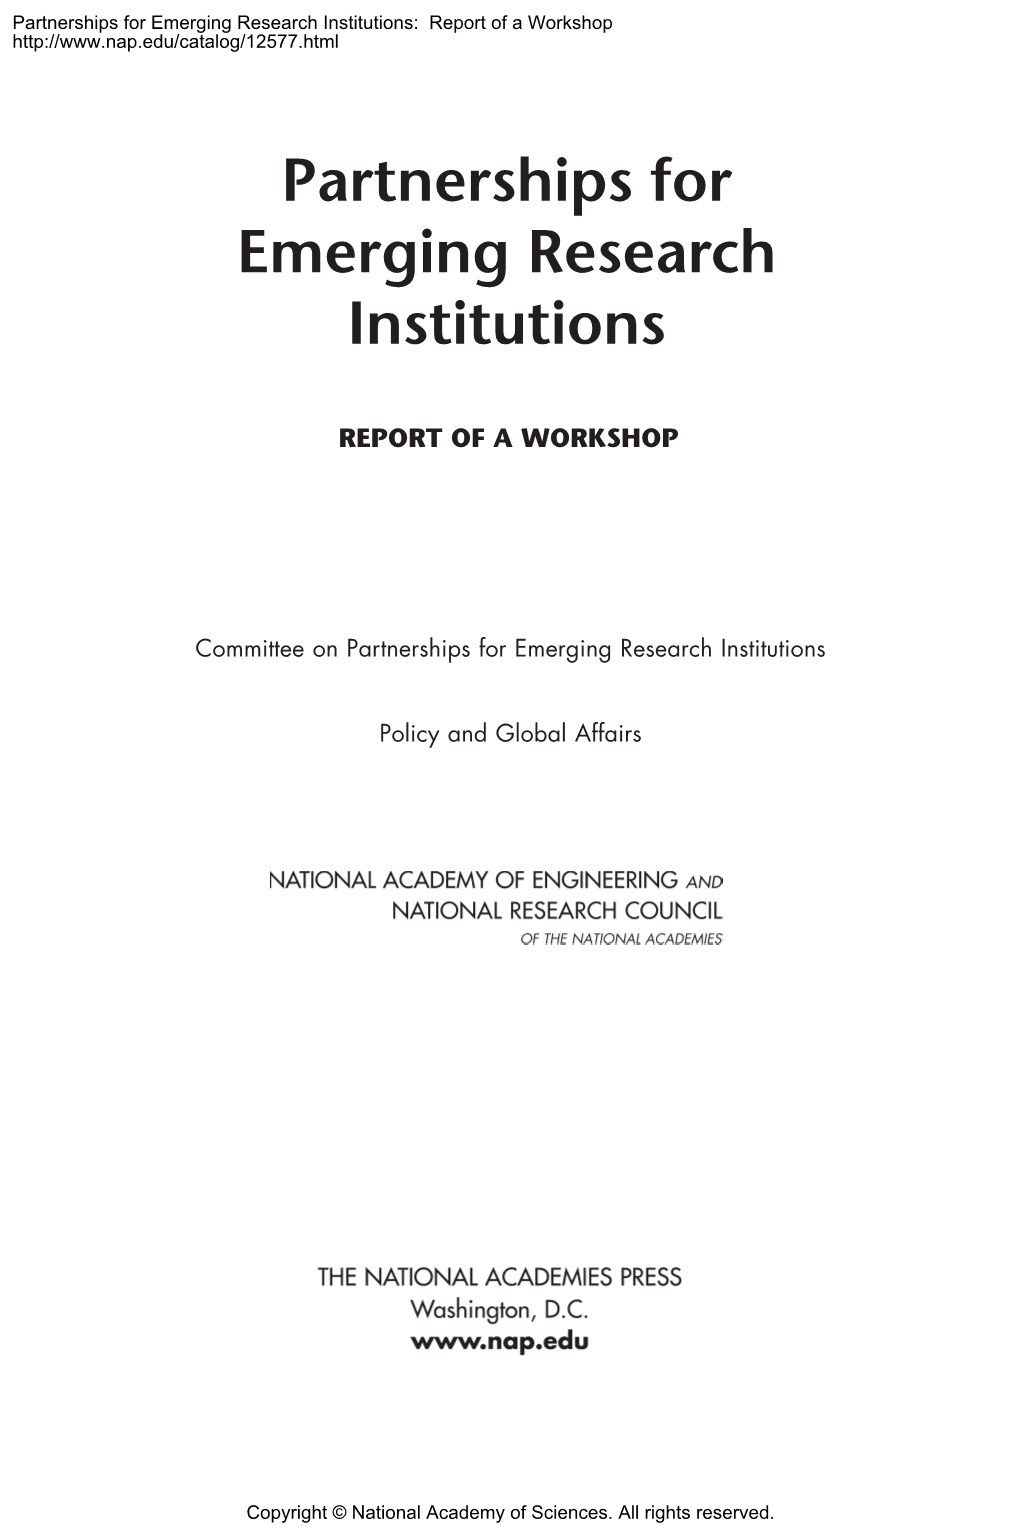 Partnerships for Emerging Research Institutions: Report of a Workshop